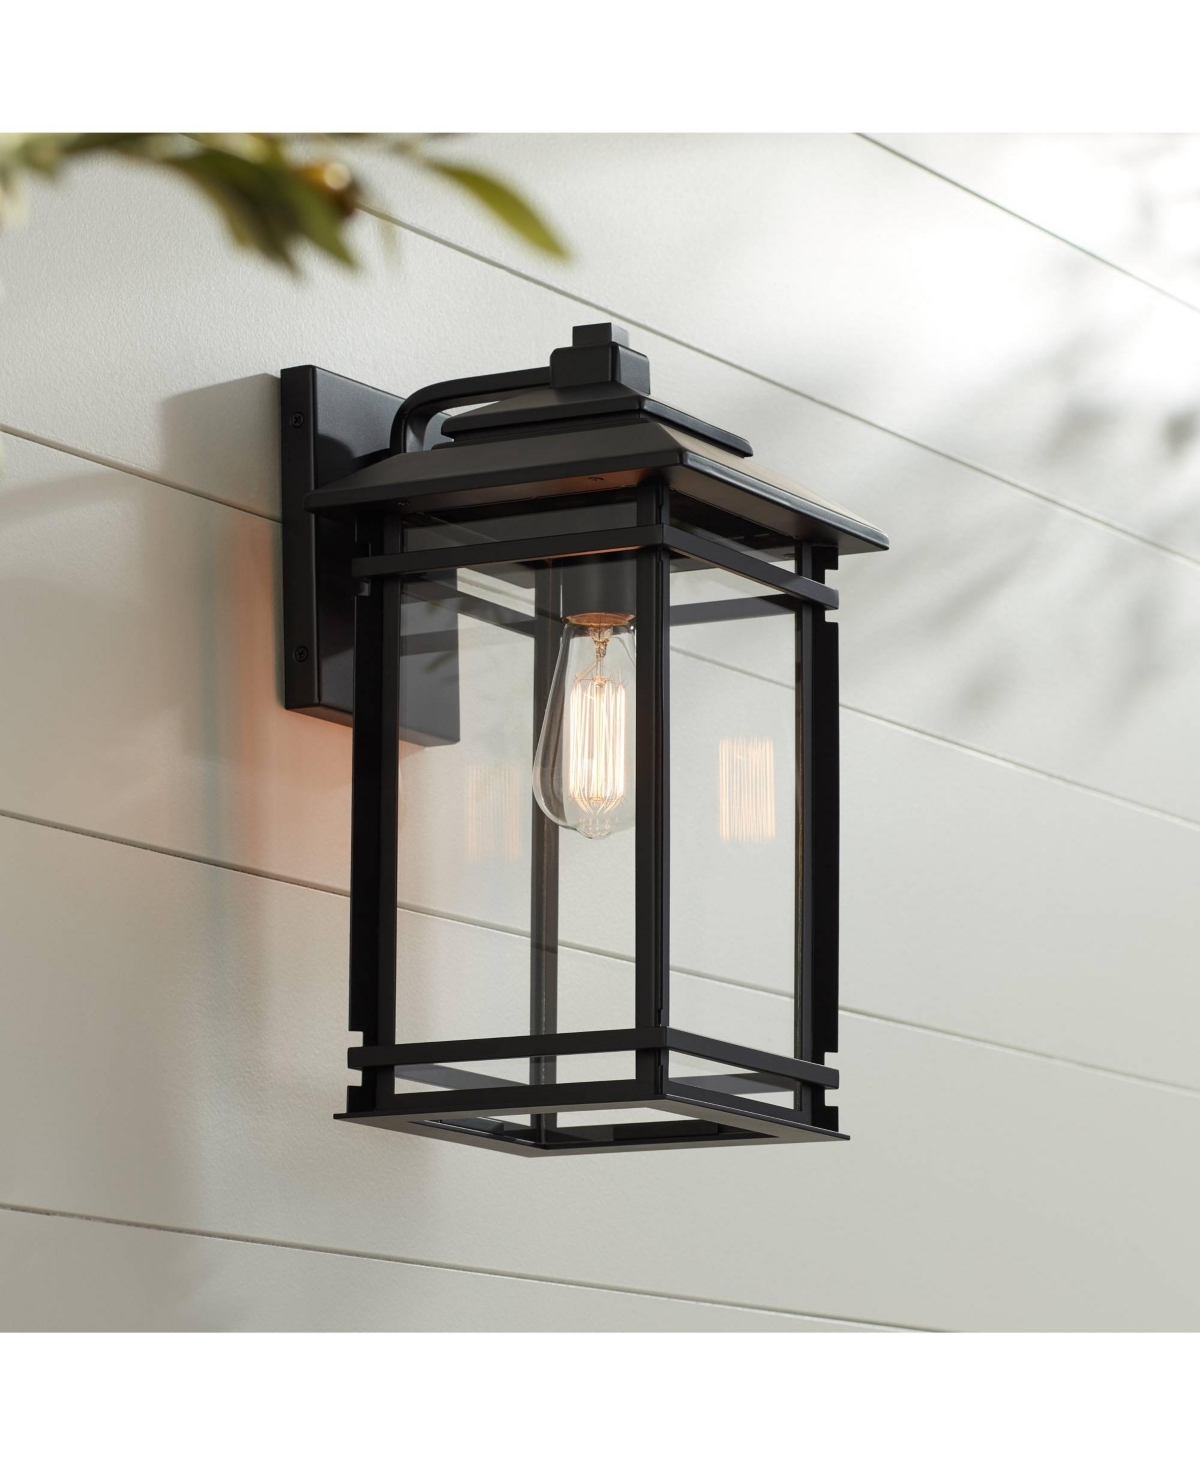 North House Mission Traditional Outdoor Wall Light Fixture Matte Black Metal 16" Clear Glass Shade for Exterior House Porch Patio Outside Deck Garage